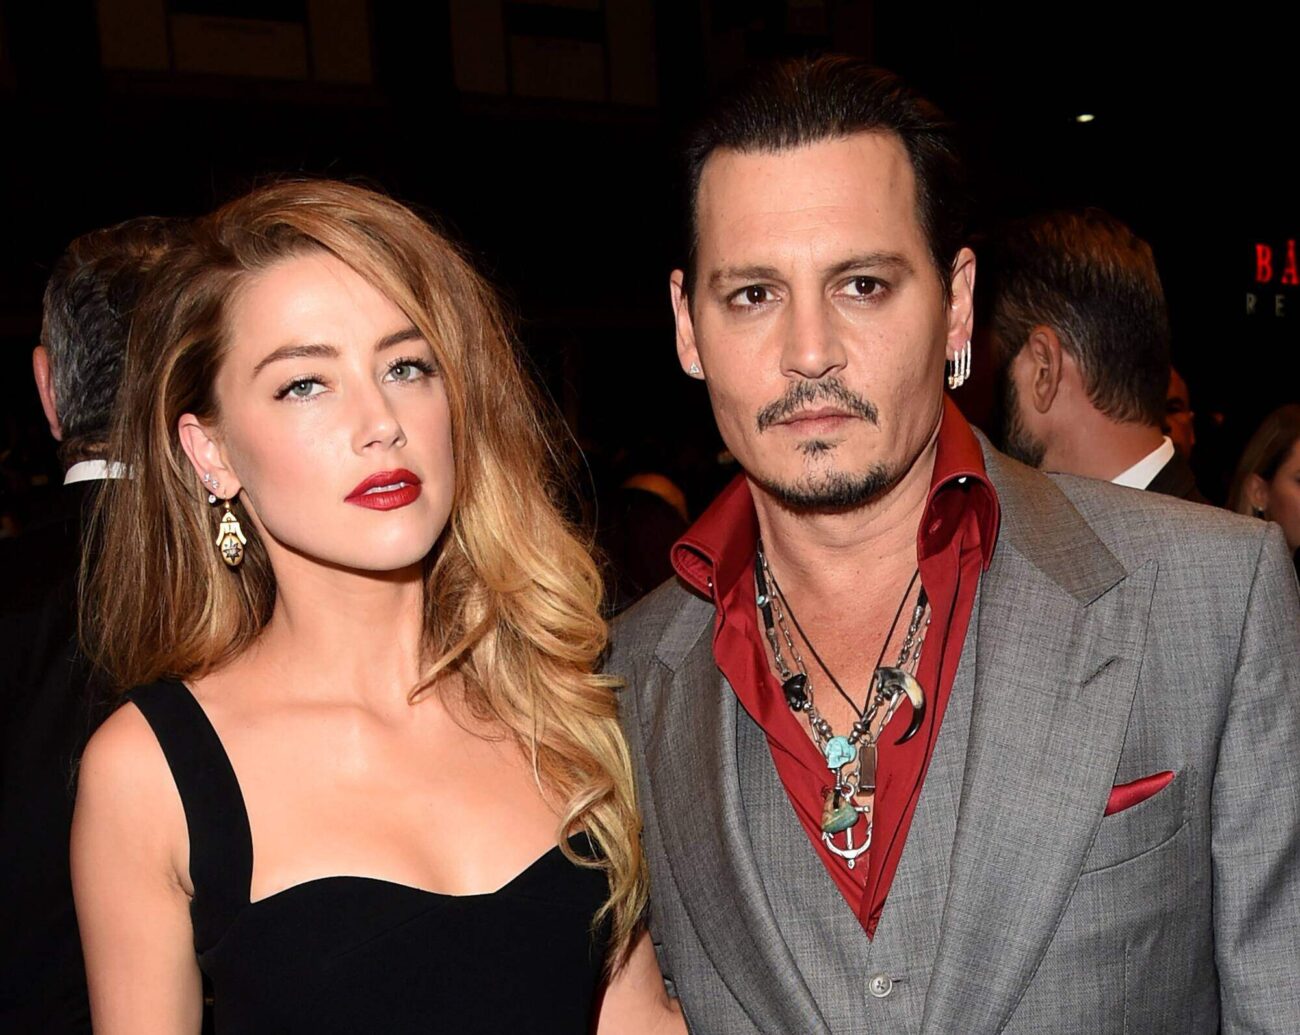 How hard did Amber Heard hit Johnny Depp? Because she just killed his Hollywood career. Here's everything the 'Aquaman' actress did to Johnny Depp.